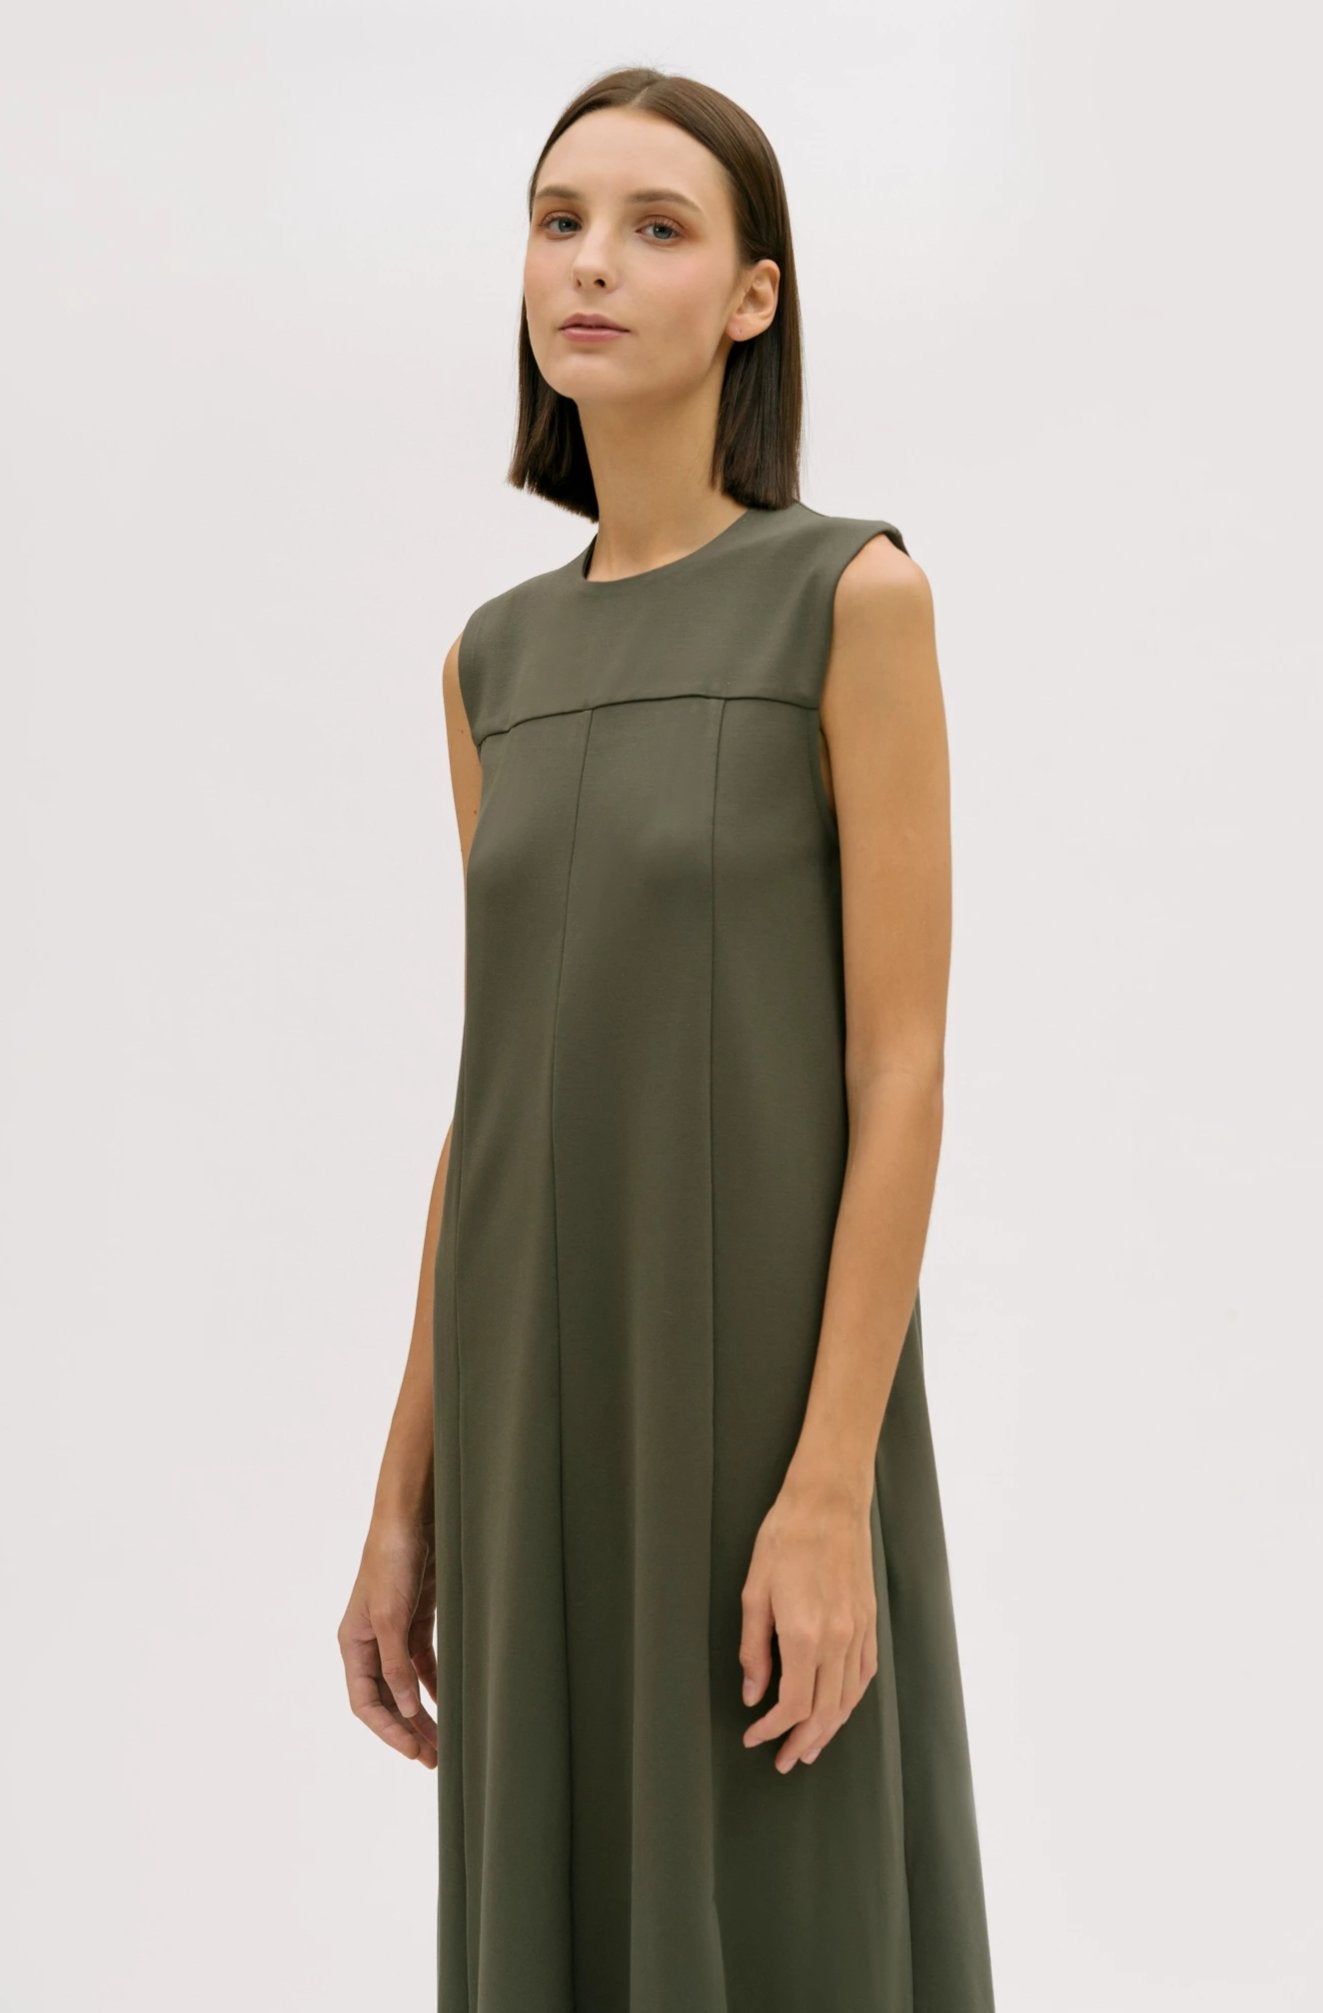 hher studios nature seam detail sleeveless belted dress dusty olive